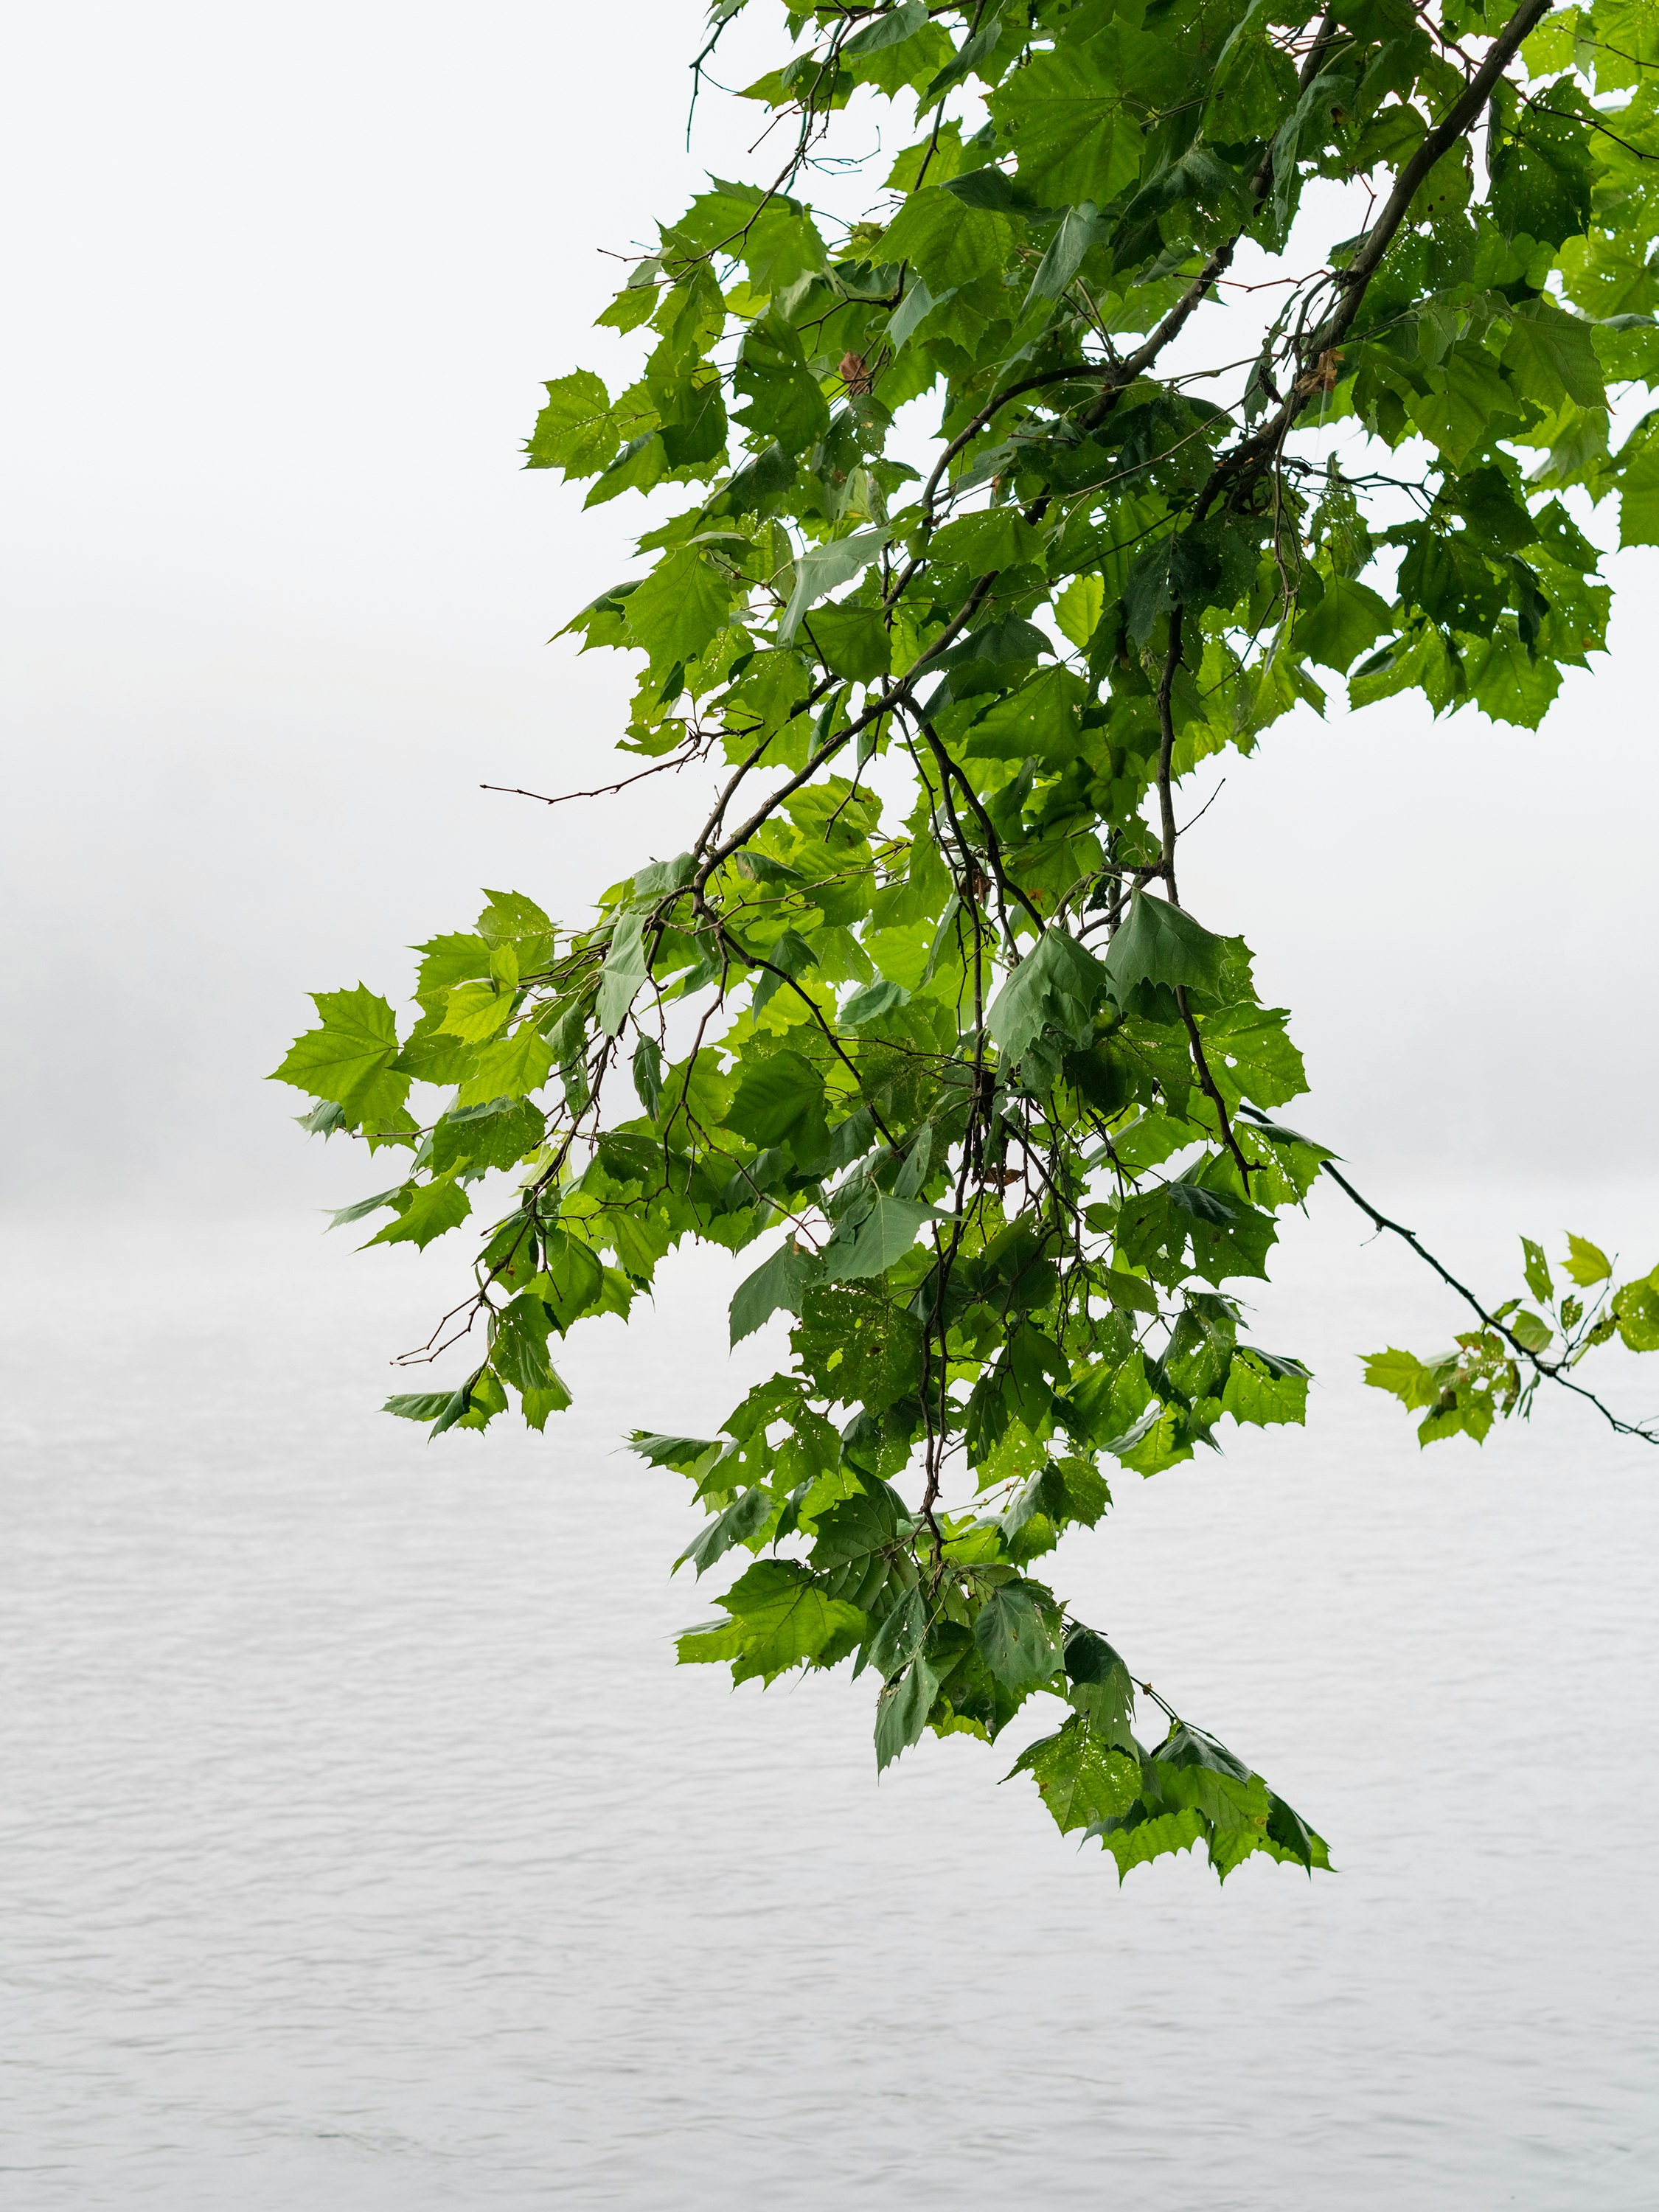 green tree near body of water during daytime